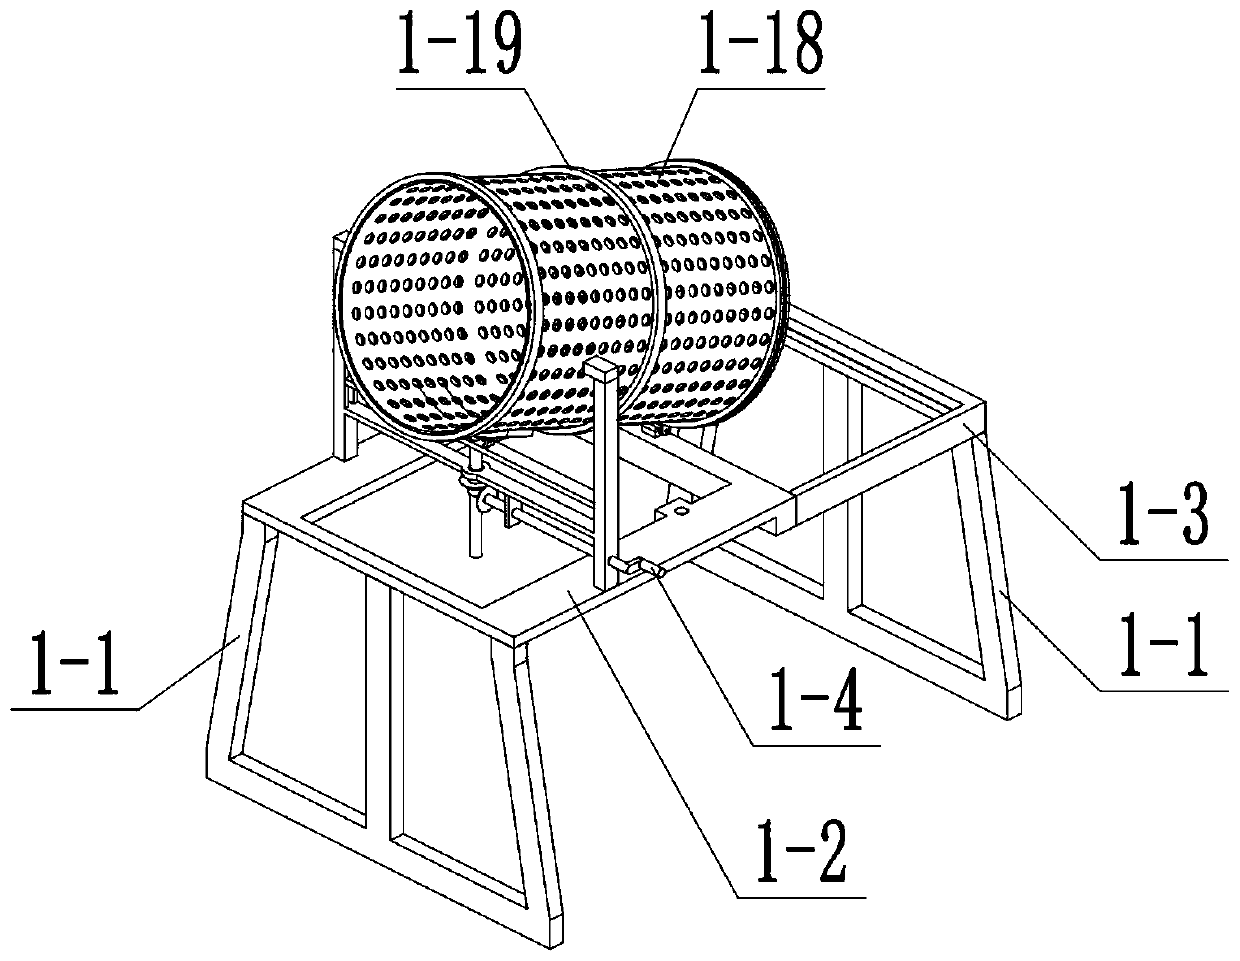 Screening device for construction aggregate